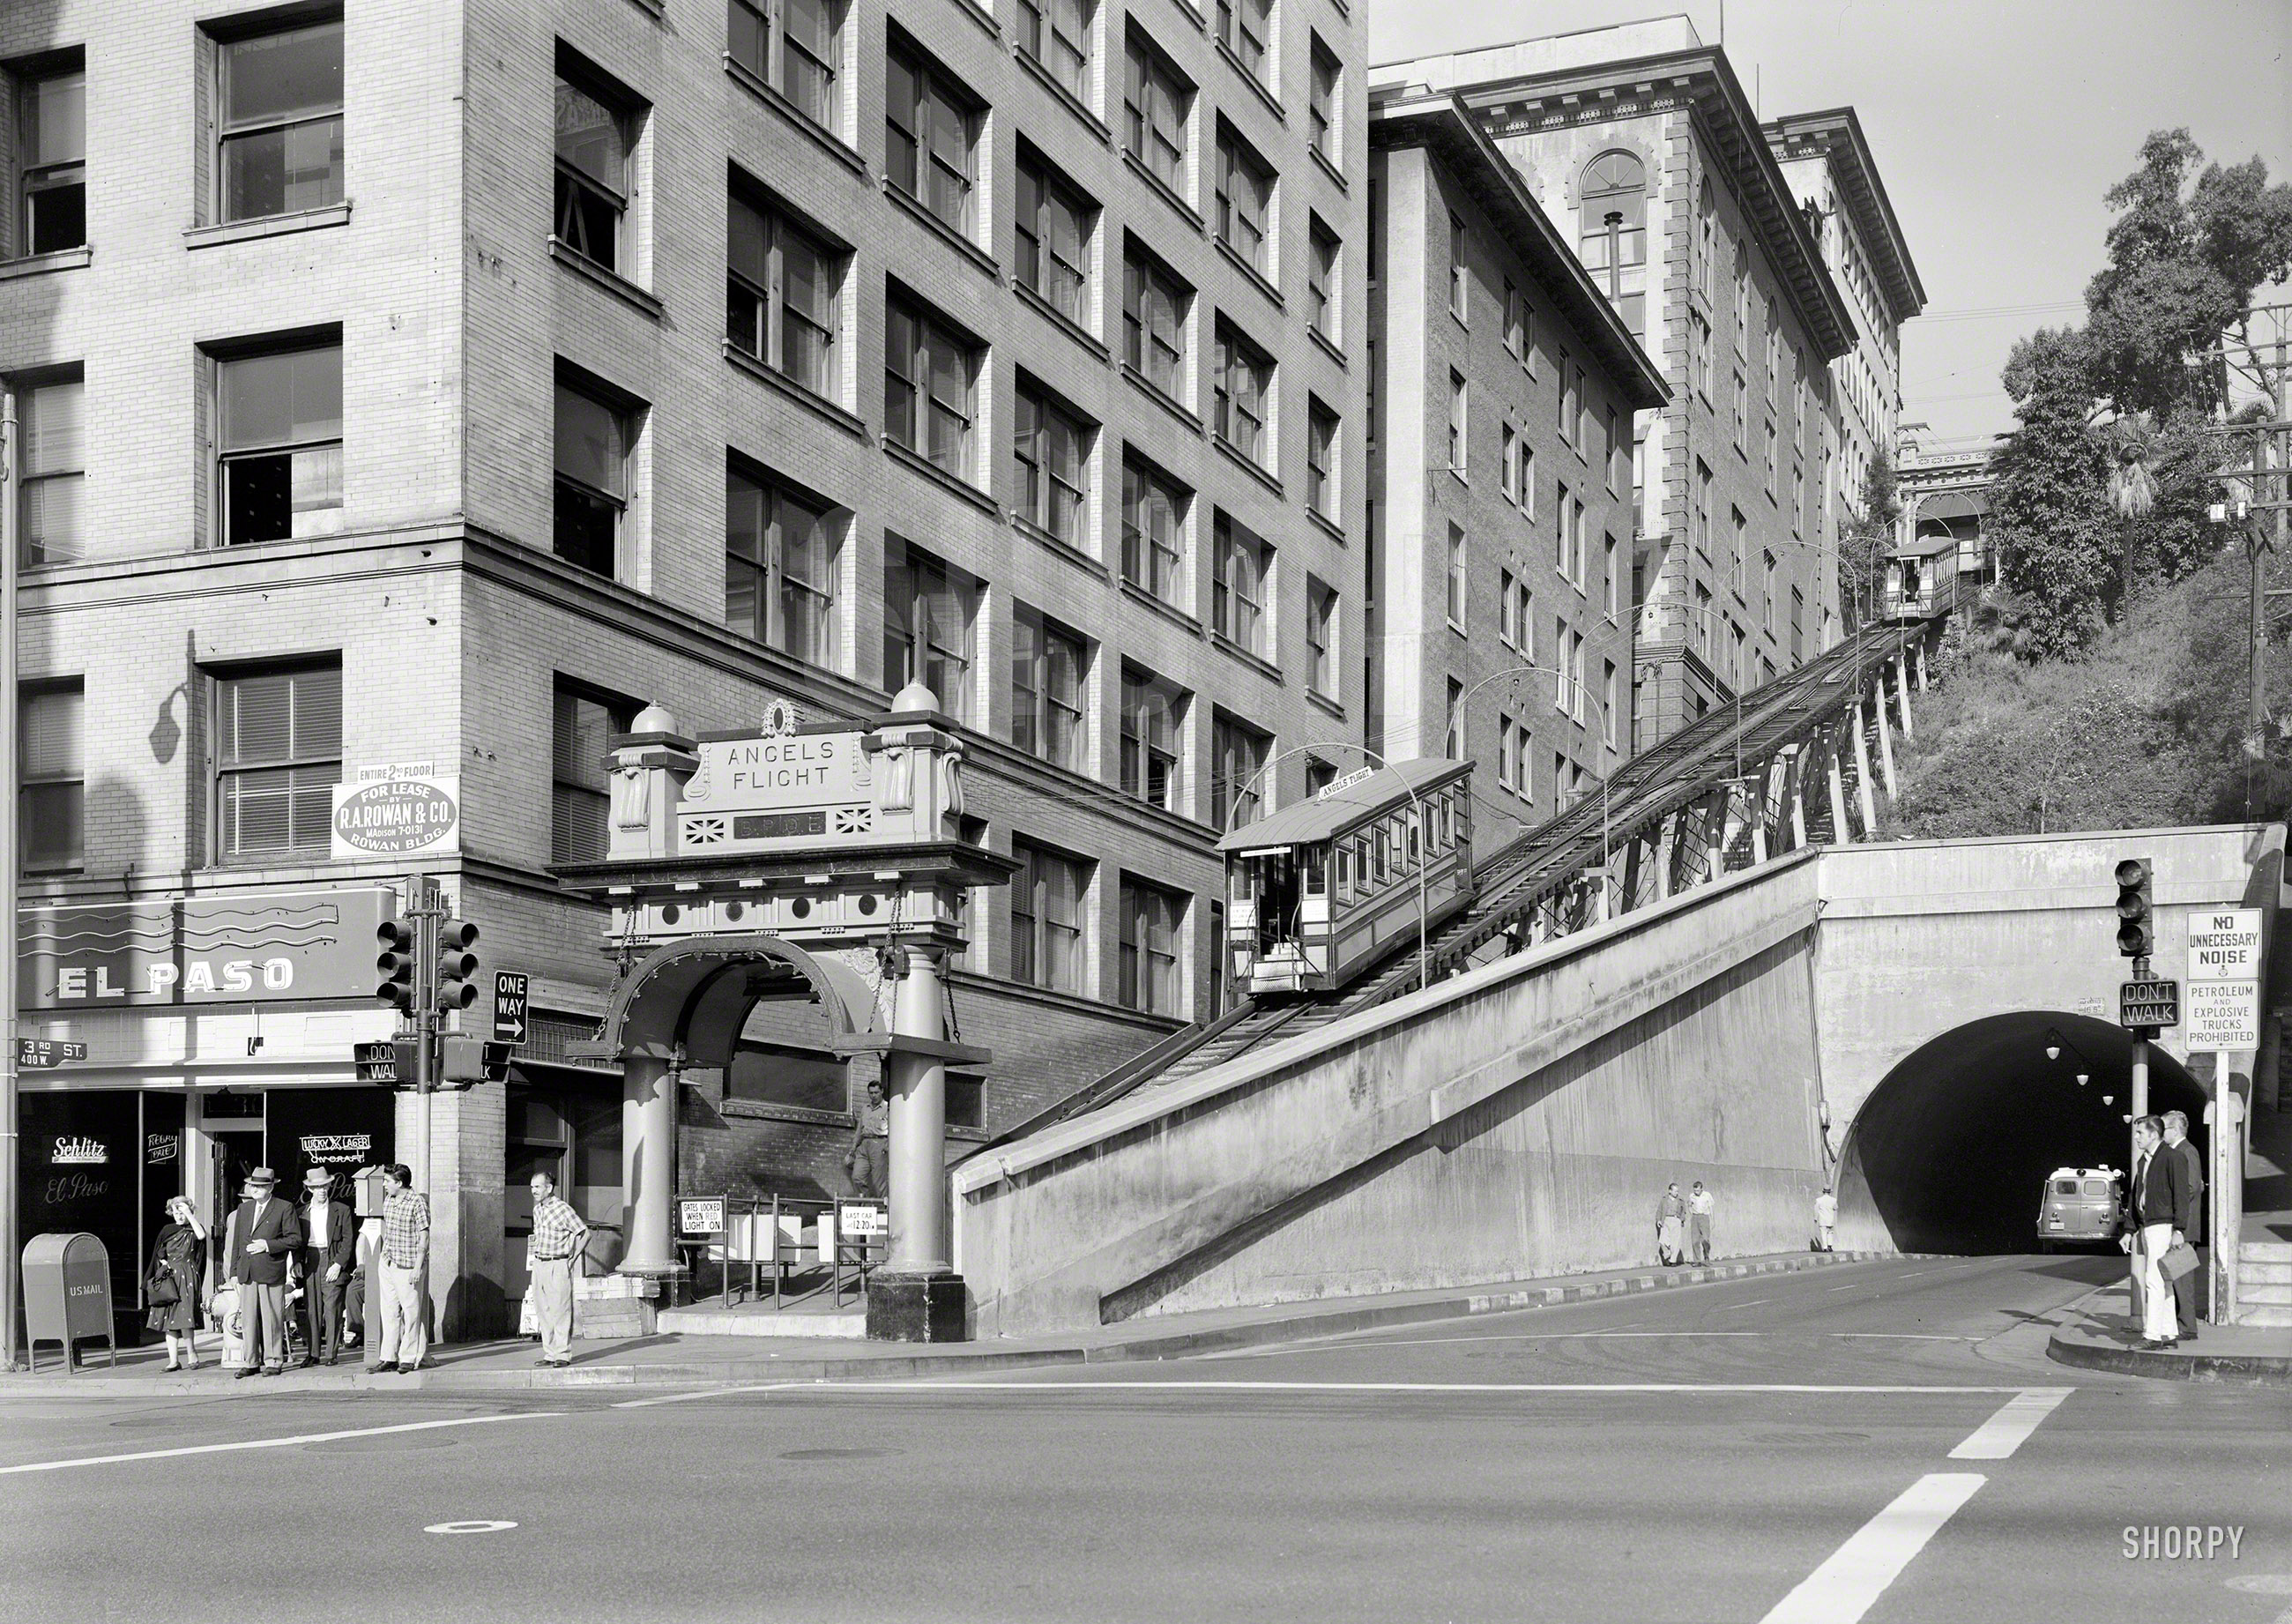 October 2, 1960 "Lower station, 'Angels Flight,' Third & Hill streets, Los Angeles. Last remaining cable railway in the City of Los Angeles." 5x7 acetate negative by Jack Boucher for the Historic American Buildings Survey. View full size.